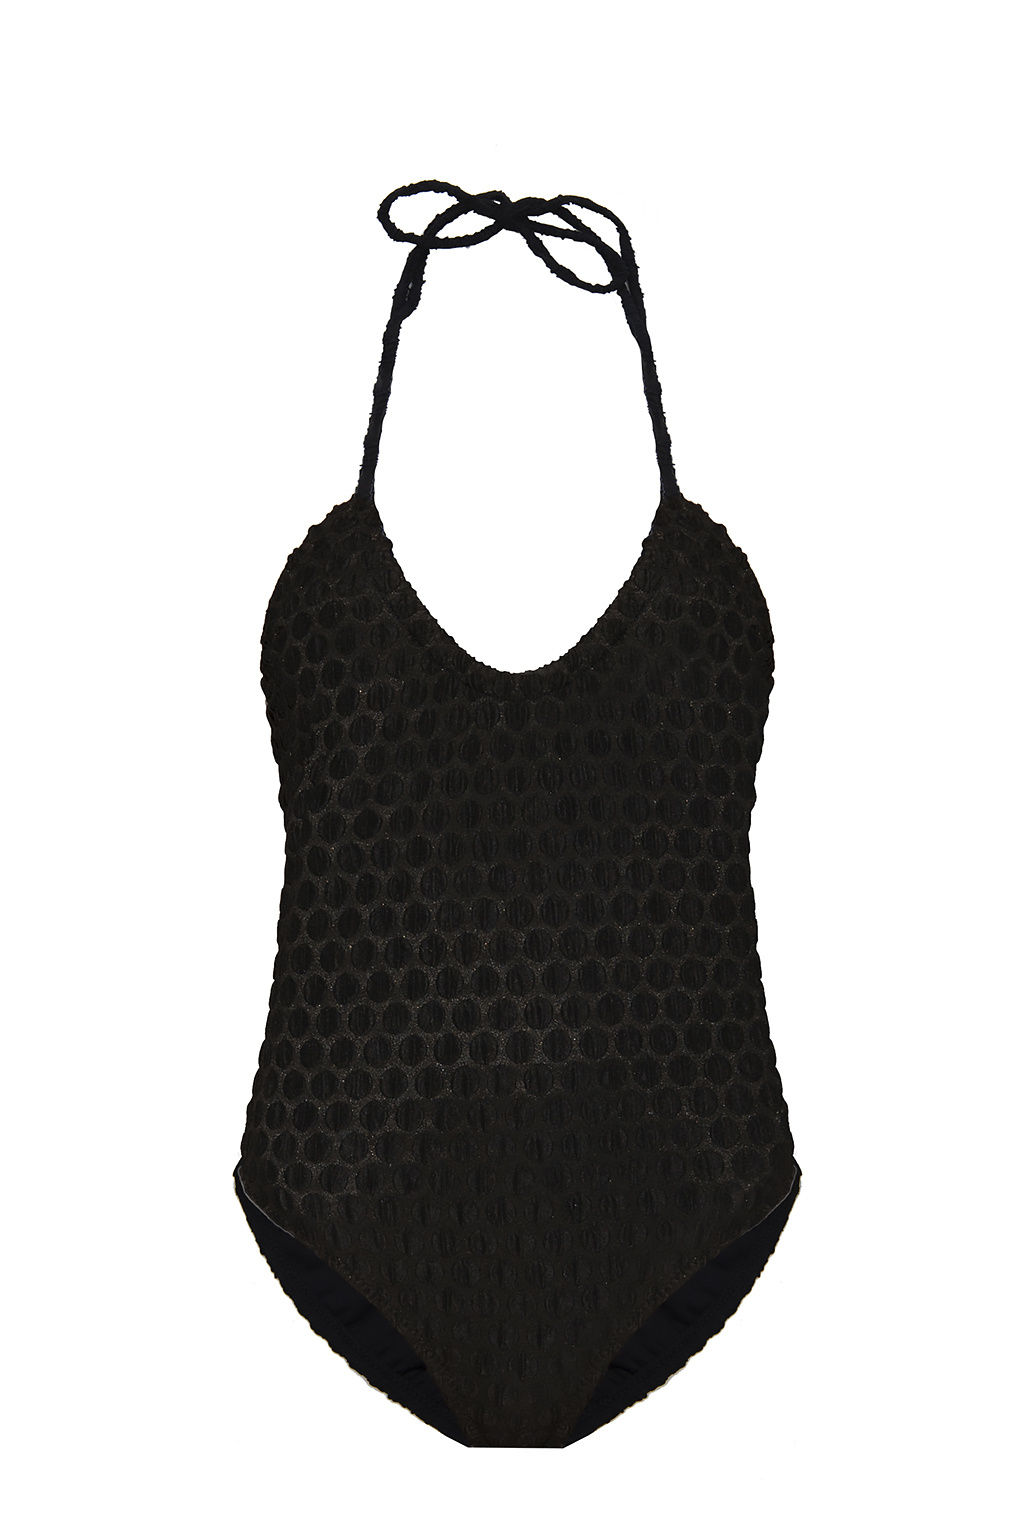 If the table does not fit on your screen, you can scroll to the right ‘Nona’ one-piece swimsuit